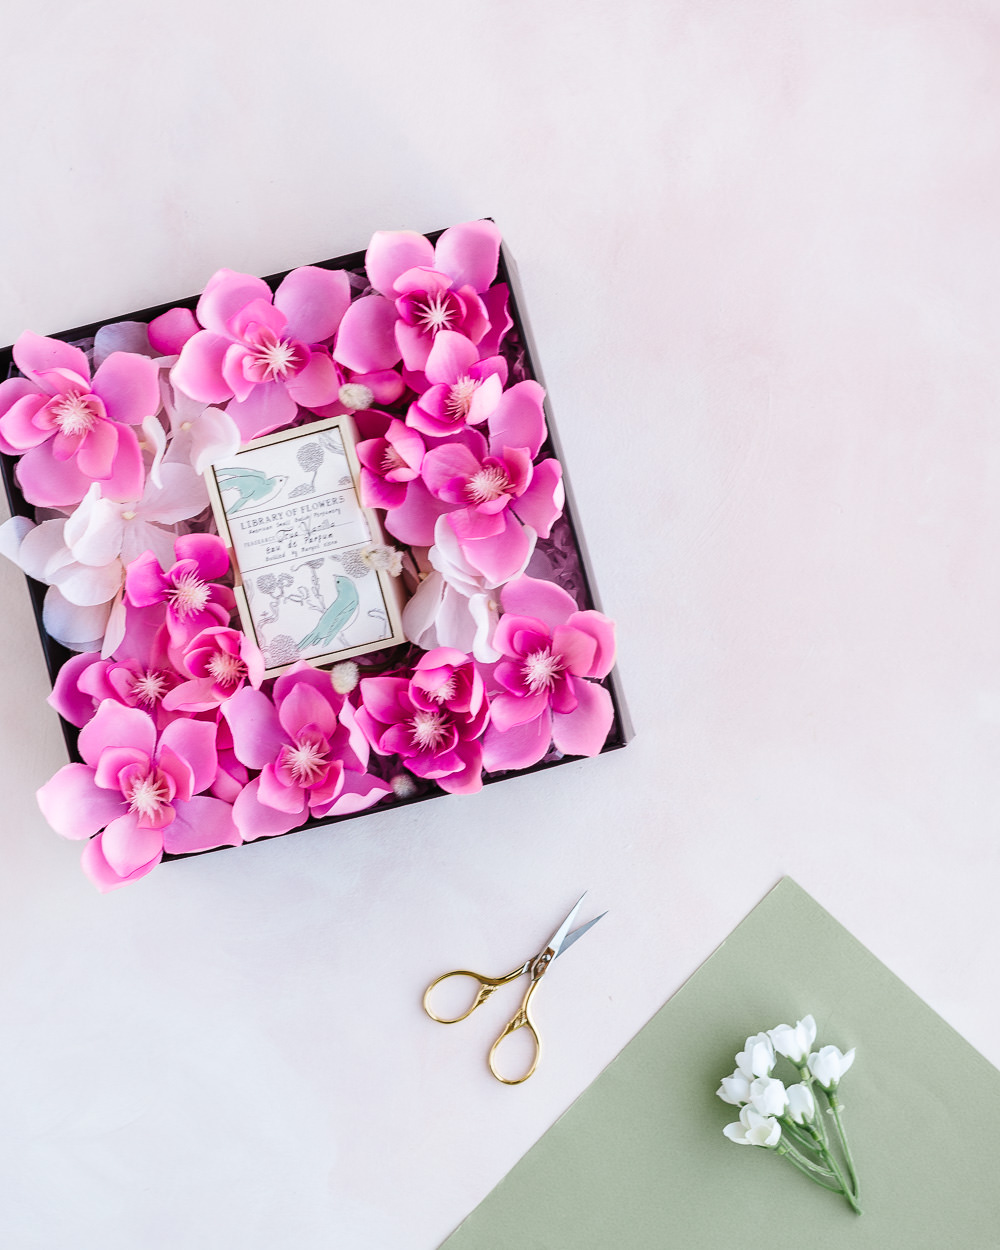 How to Make a Beautiful Flower Gift Box DIY